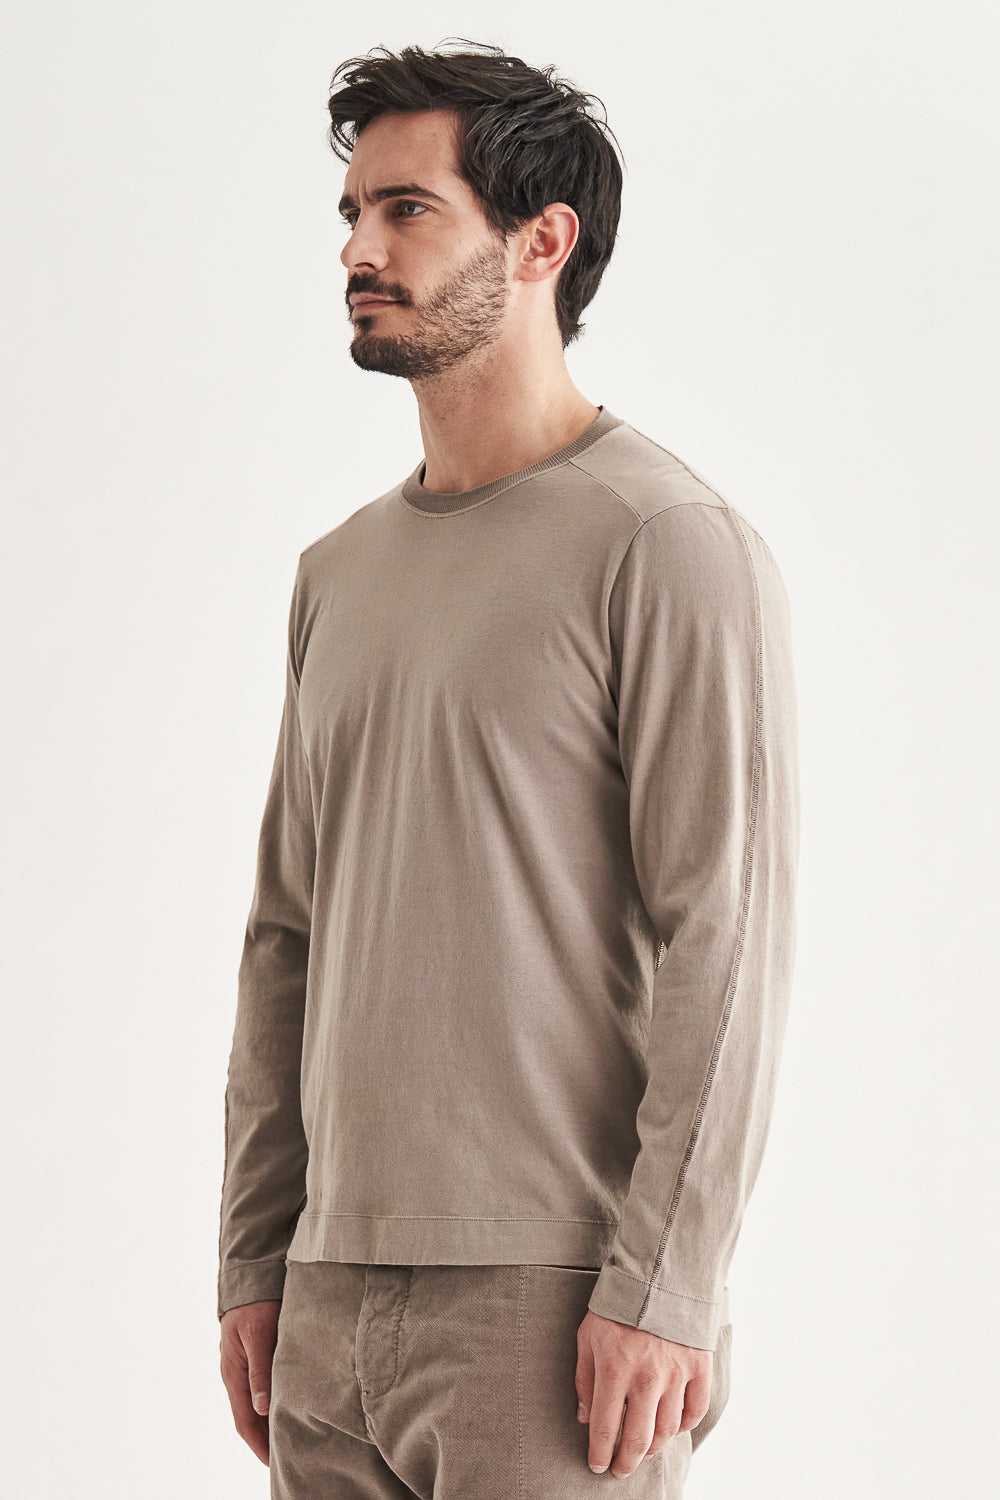 Buy the Transit Cotton L/S Jersey T-Shirt in Beige at Intro. Spend £50 for free UK delivery. Official stockists. We ship worldwide.